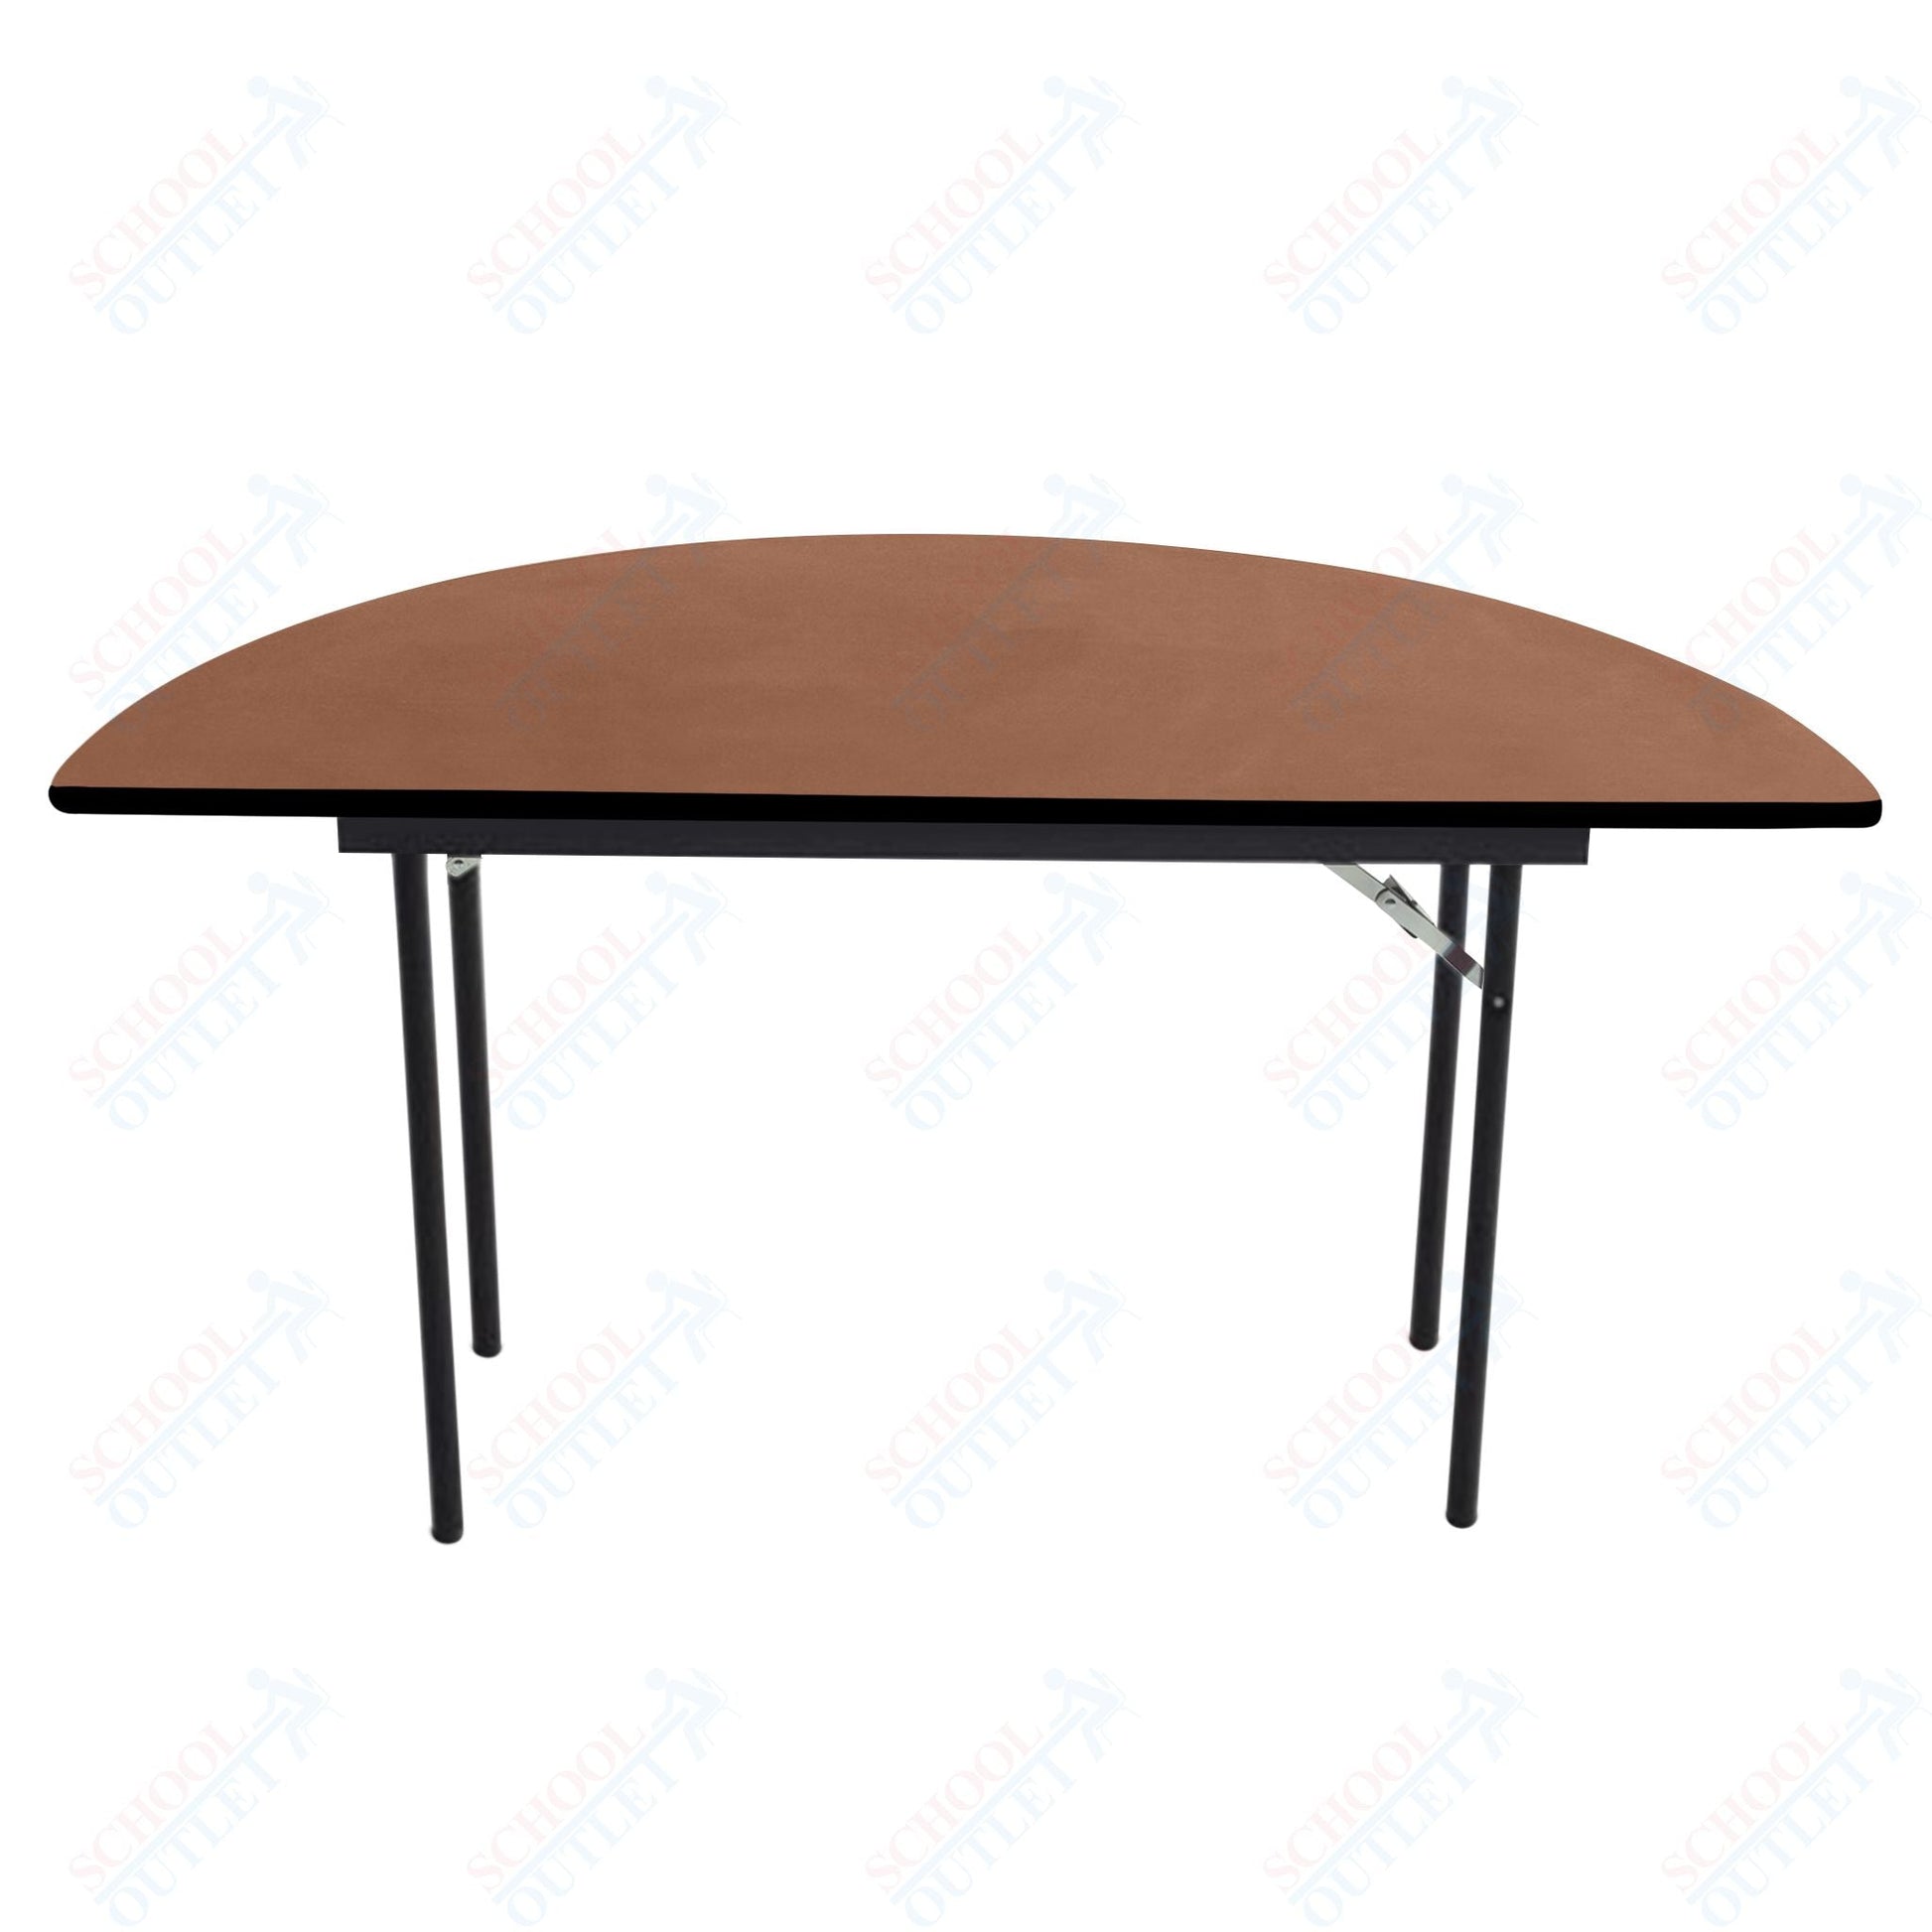 AmTab Folding Table - Plywood Stained and Sealed - Vinyl T - Molding Edge - Half Round - Half 96" Diameter x 29"H (AmTab AMT - HR96PM) - SchoolOutlet